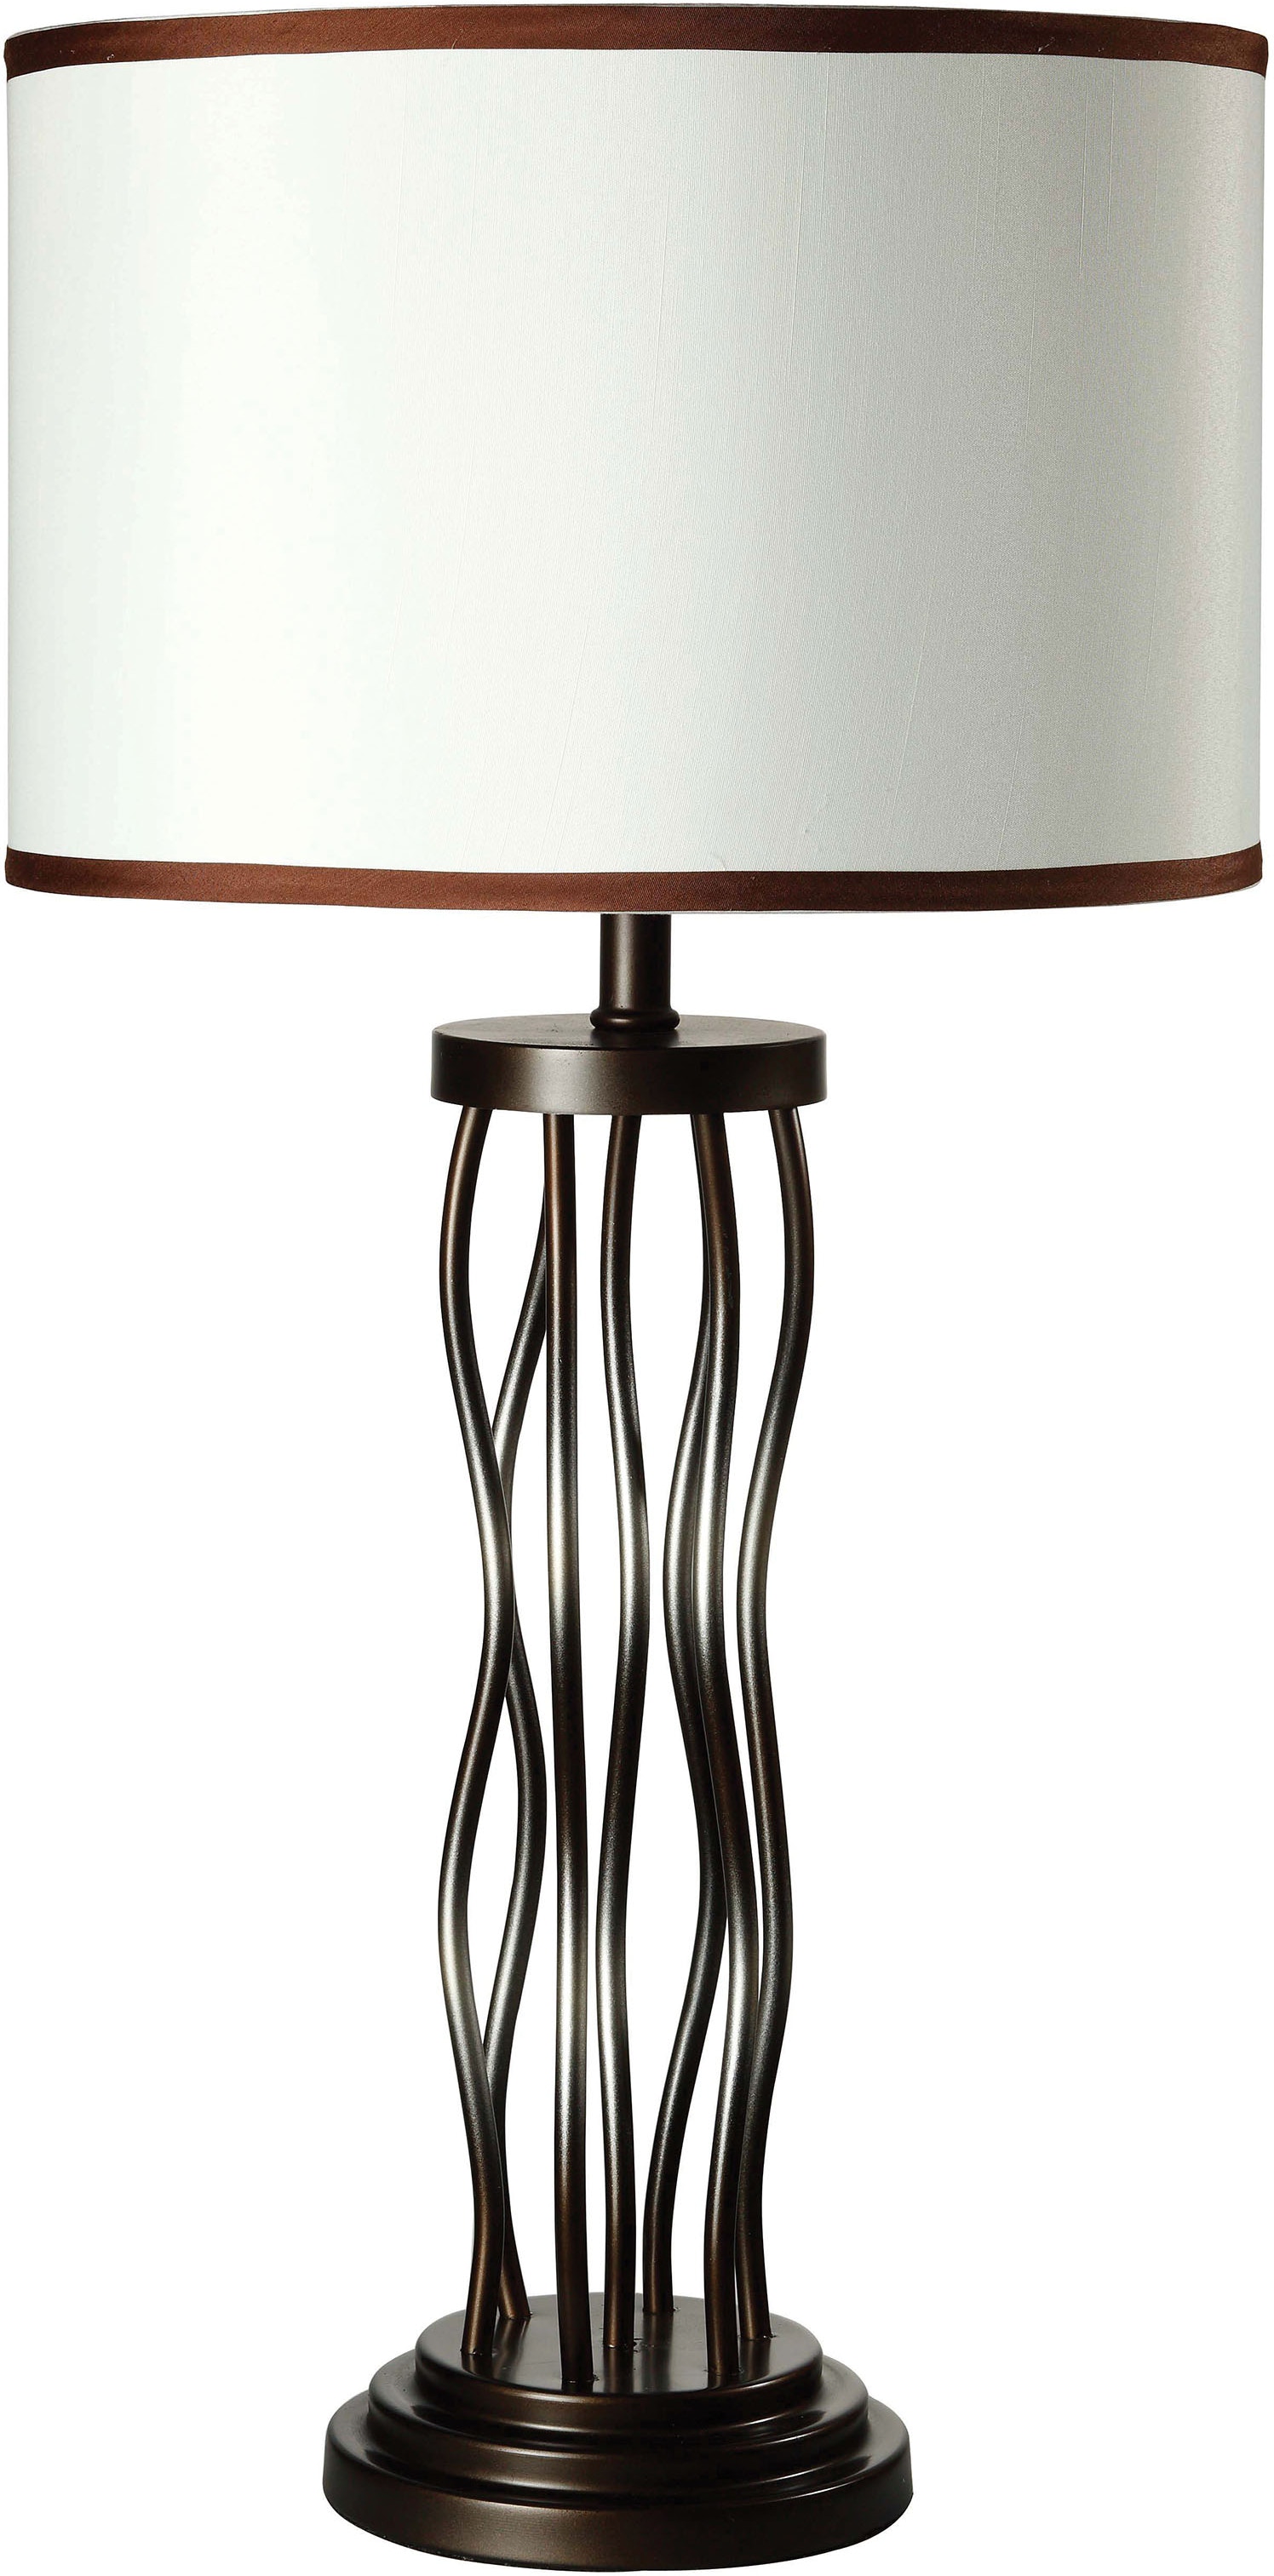 Acme Furniture Table and Floor Lamps Jared Table Lamp (2pc) 40070